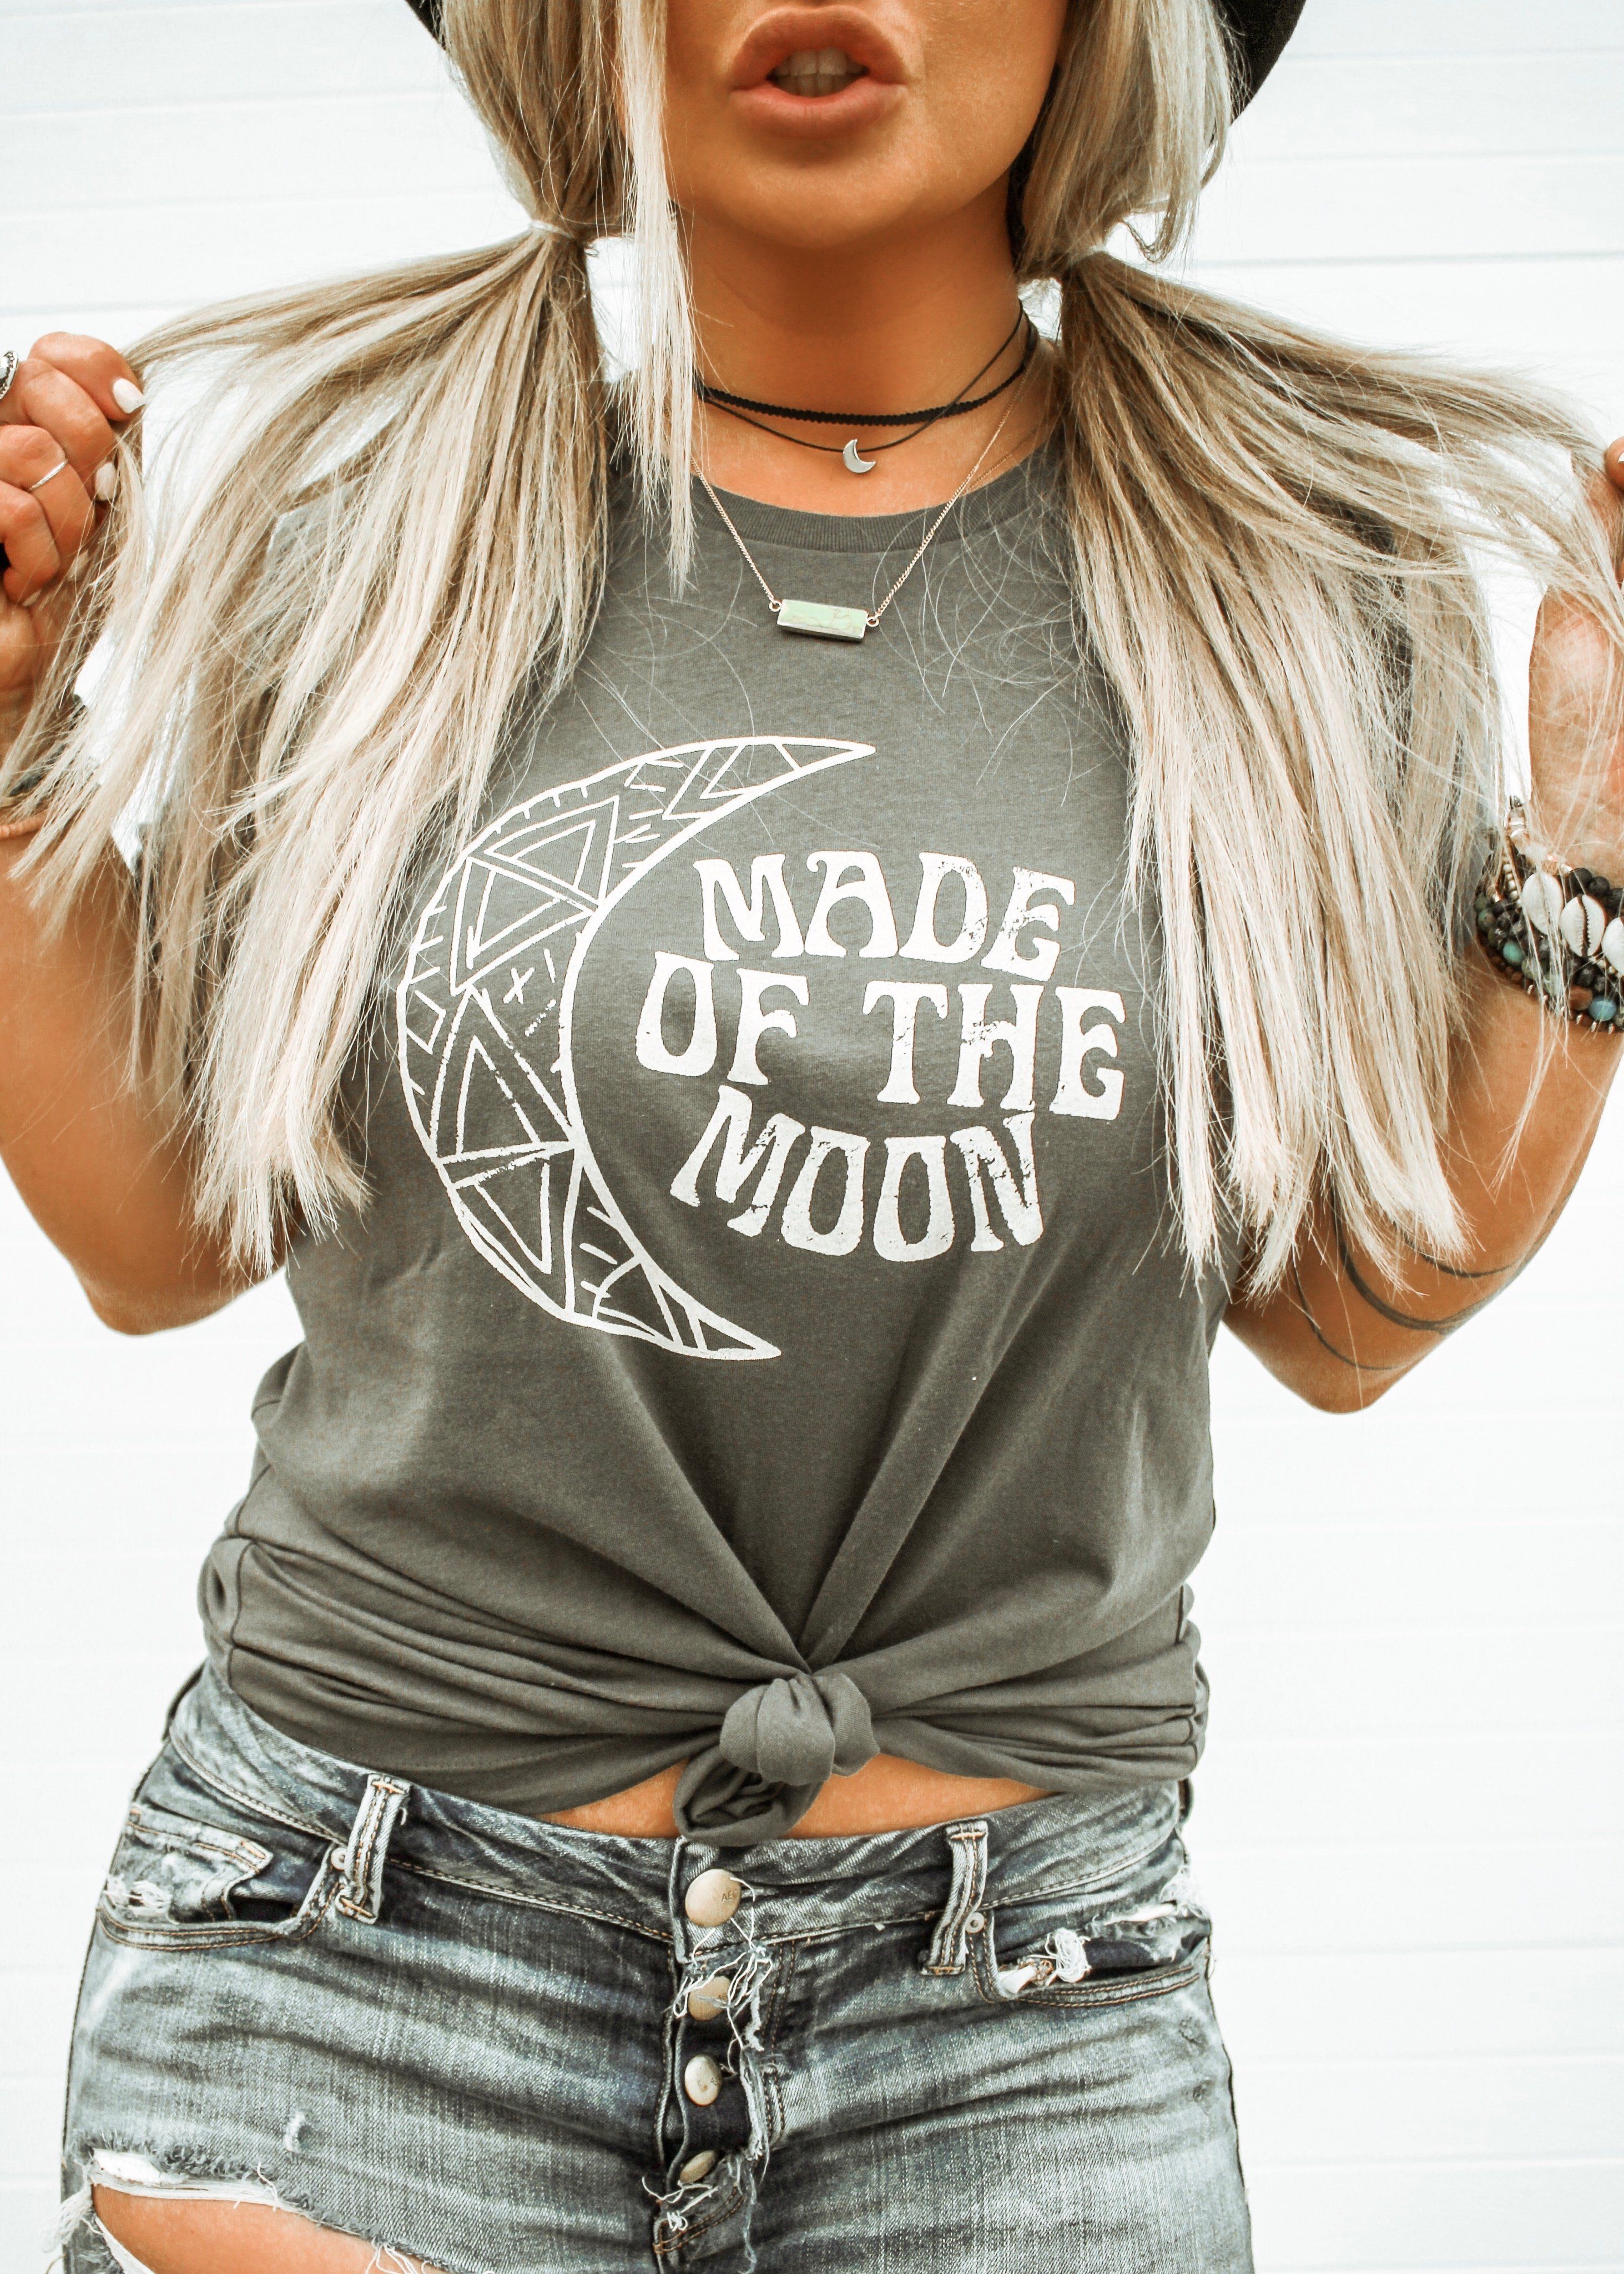 Final sale: made of the moon tee women's graphic tee -   16 DIY Clothes Boho tees ideas